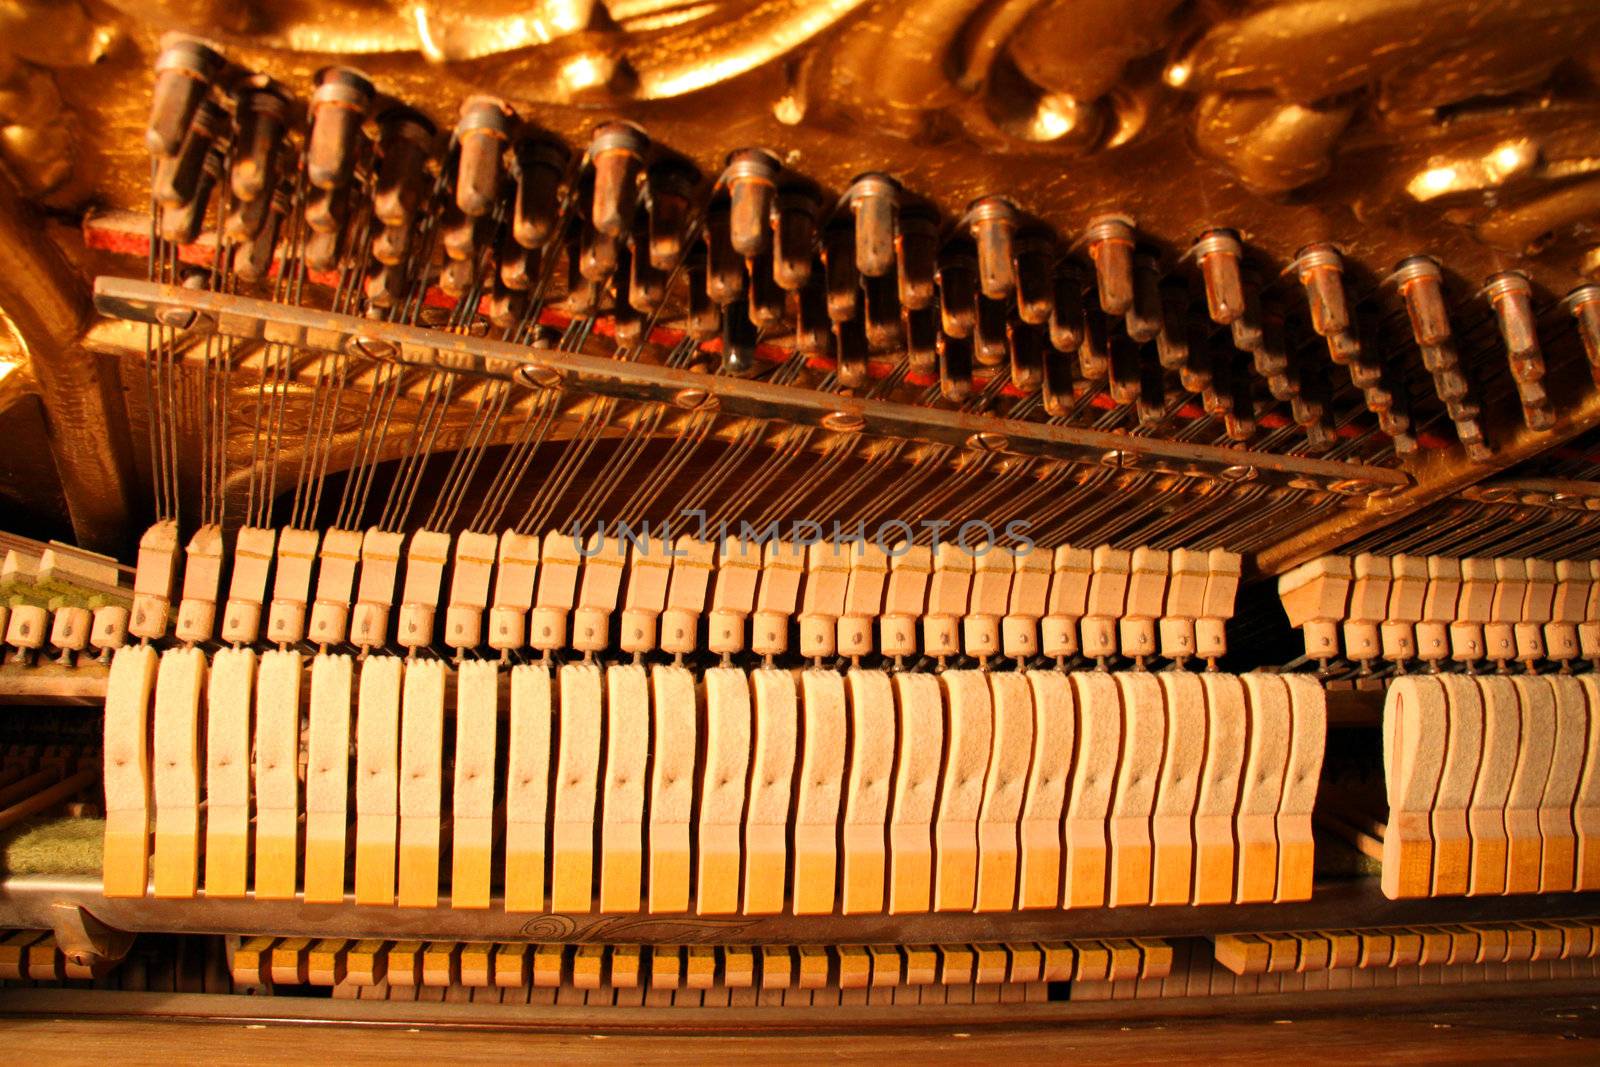 Inside an Upright Piano - Felt Hammers used to strike Steel Strings and wound knobs to tune.